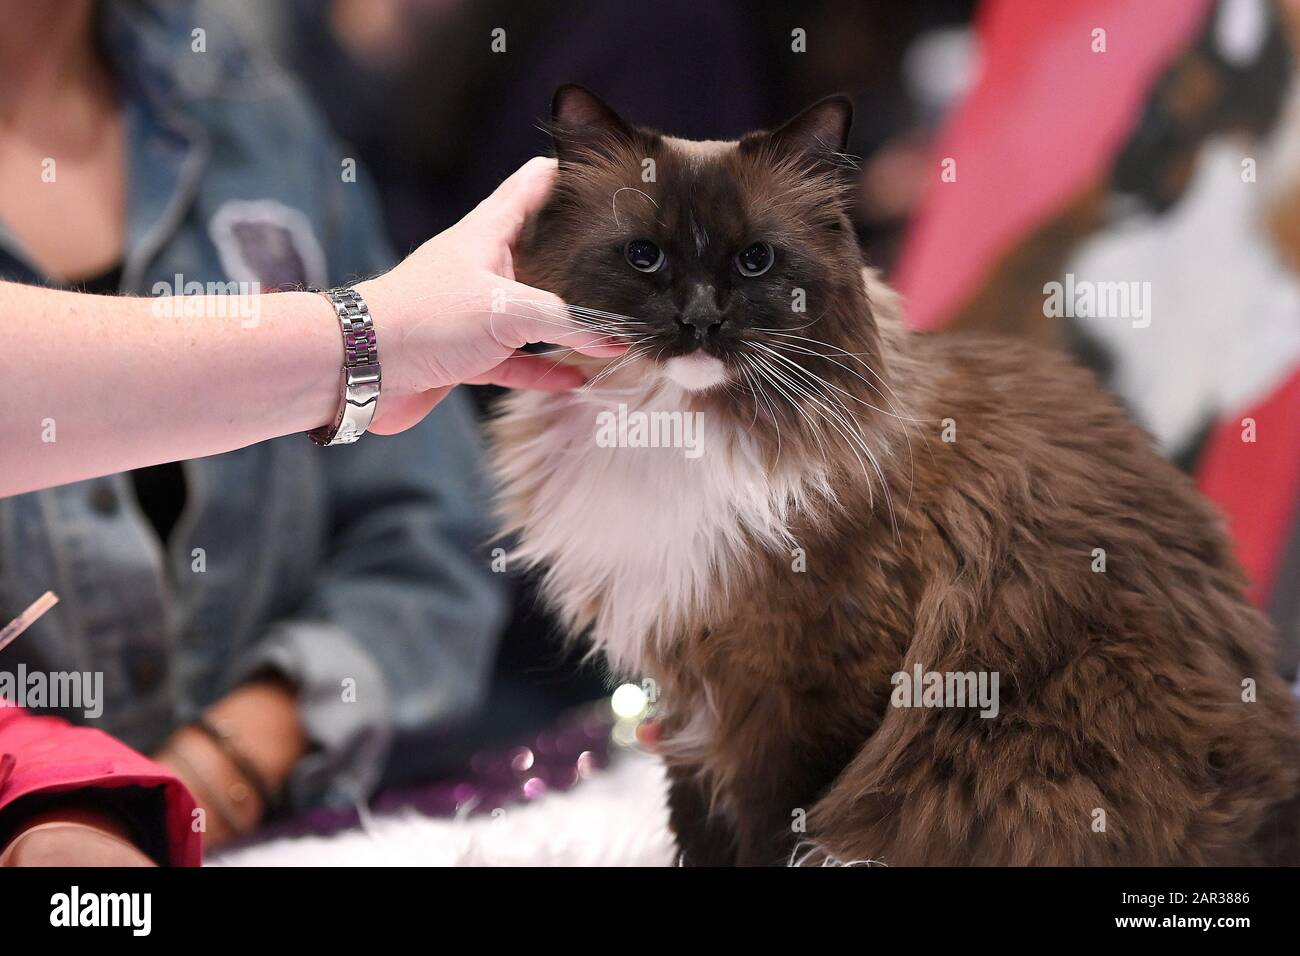 A soft hand carresses a seal minked mitted Ragdoll cat named Tickle Me Brown at the American Kennel Club “AKC Meet The Breeds 2020” held at the Jacob Javitz Center in New York, NY, January 25, 2020. (Photo by Anthony Behar/Sipa USA) Stock Photo